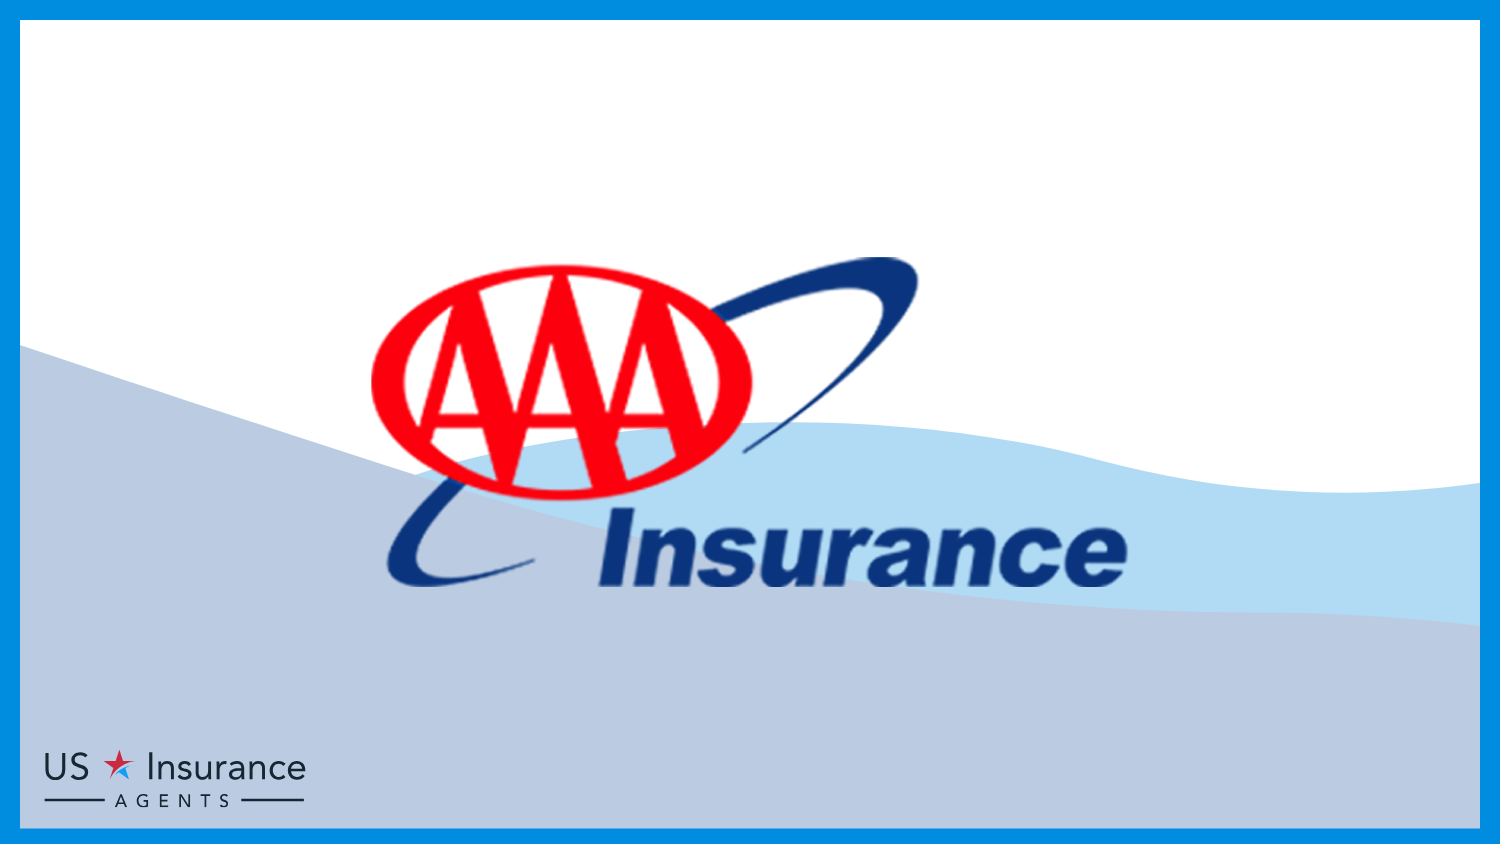 AAA: Best Business Insurance for Civil Engineers